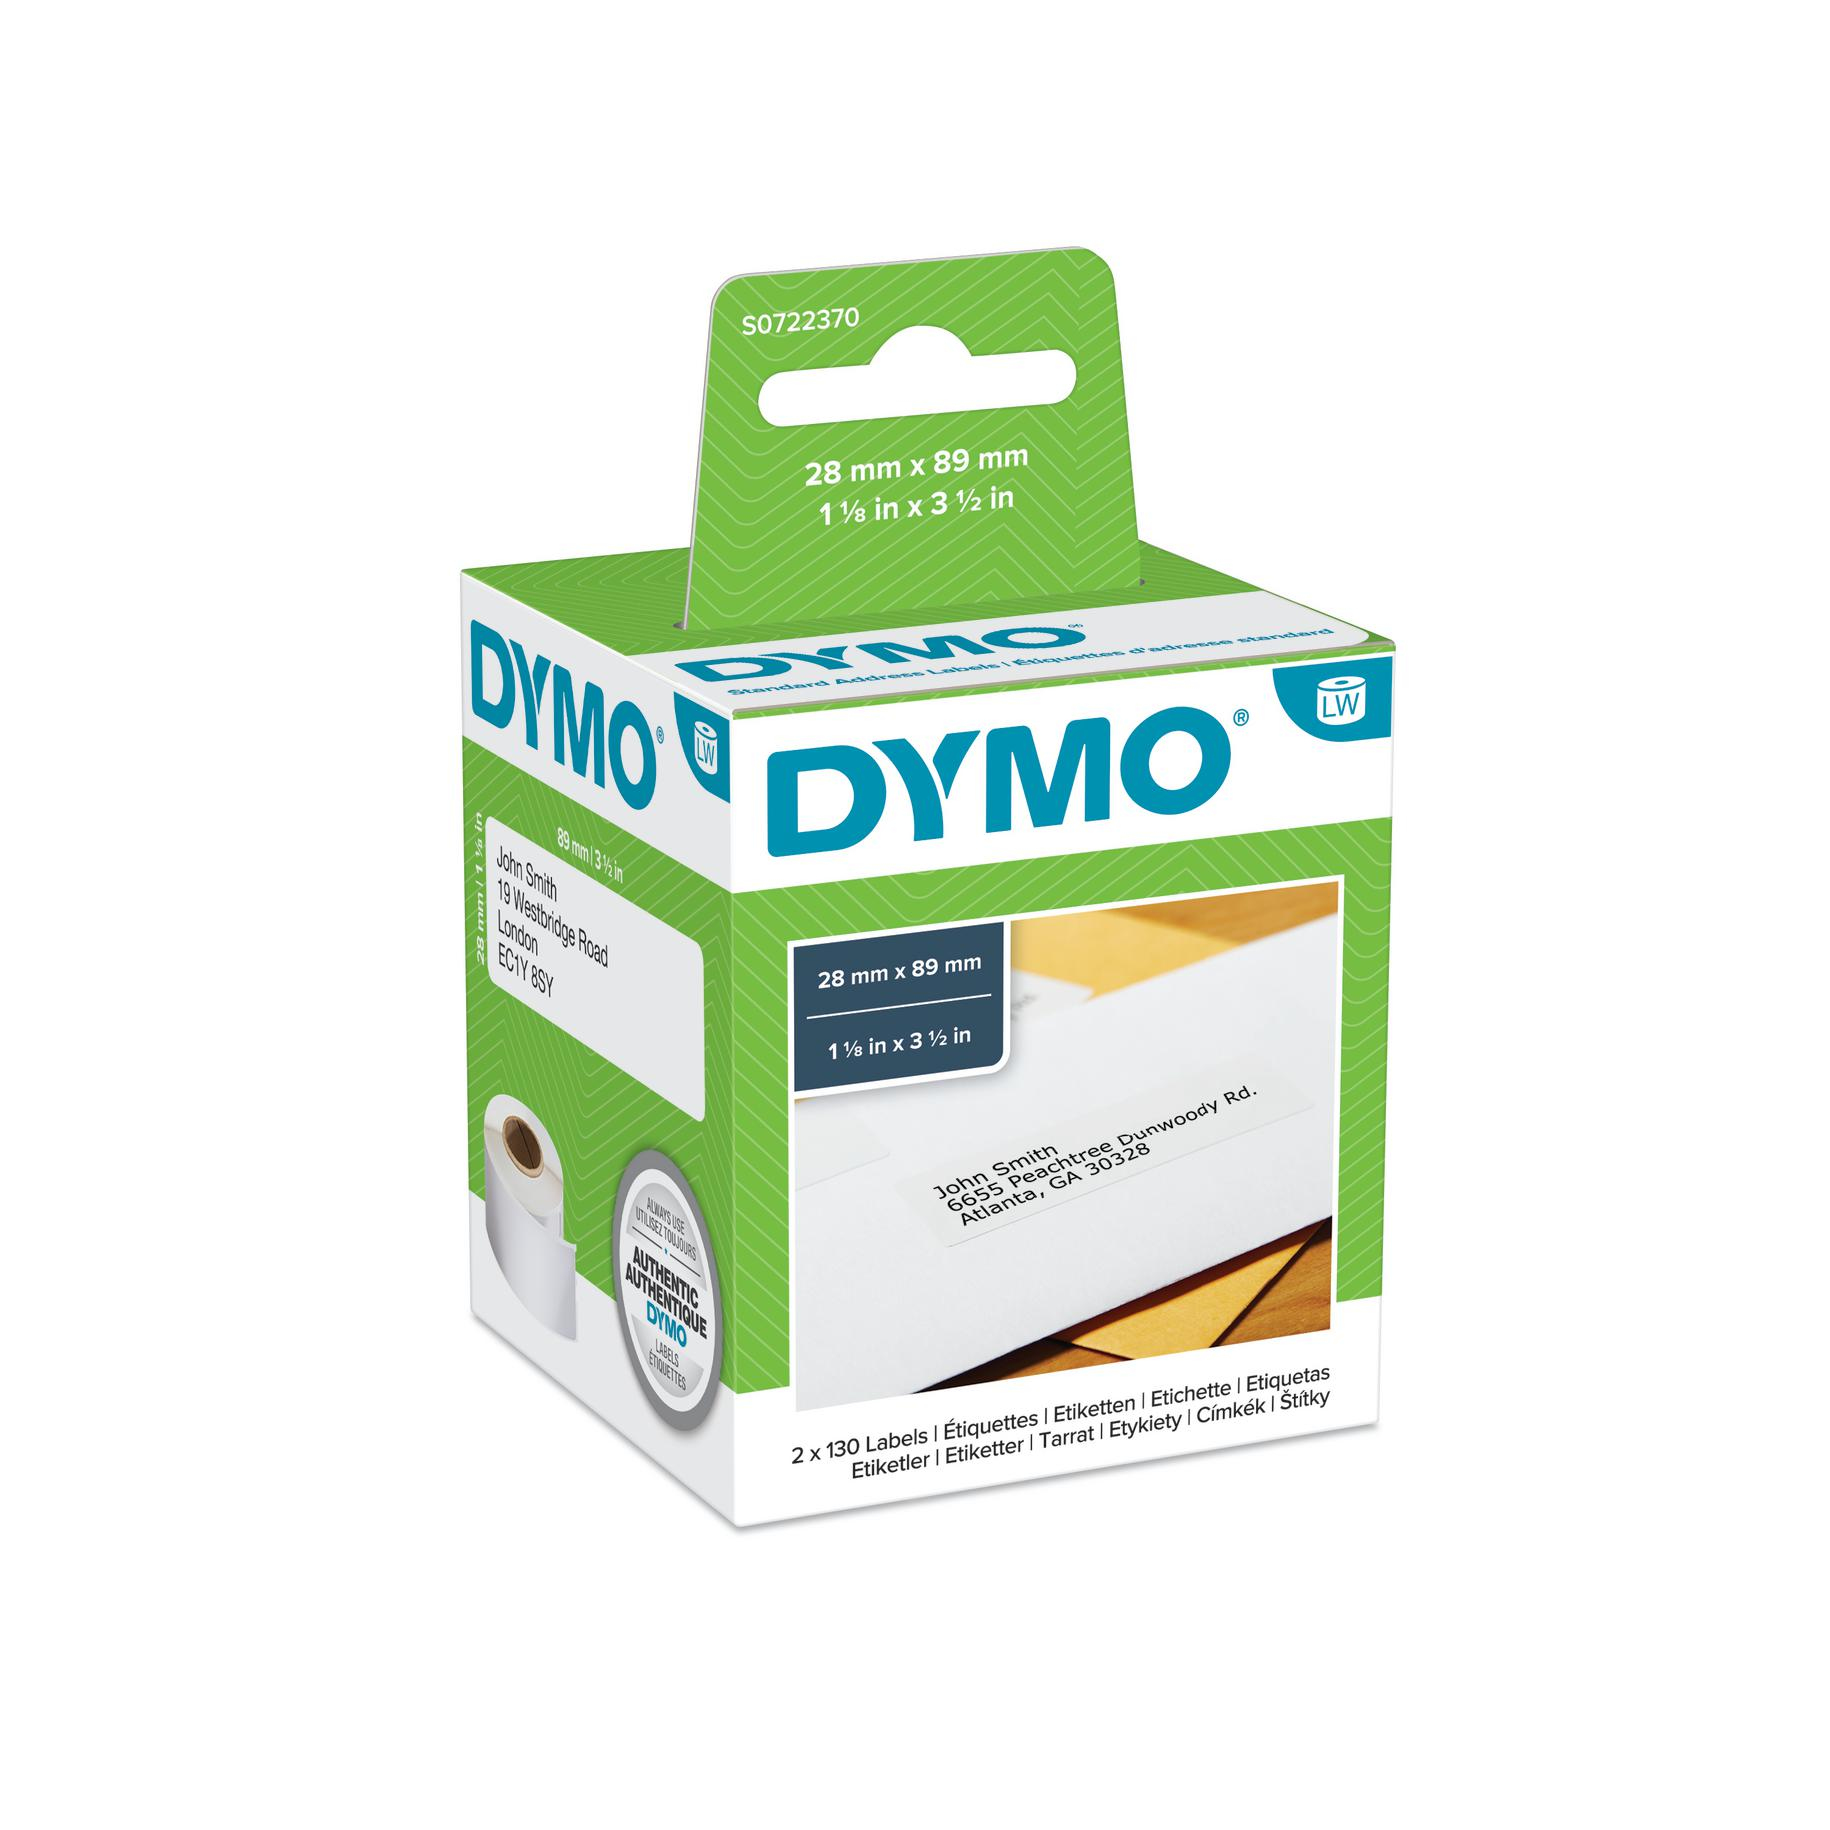 Photos - Office Paper DYMO 99010/S0722370 DirectLabel-etikettes 89mm x28mm Pack=2 for  4 S07 